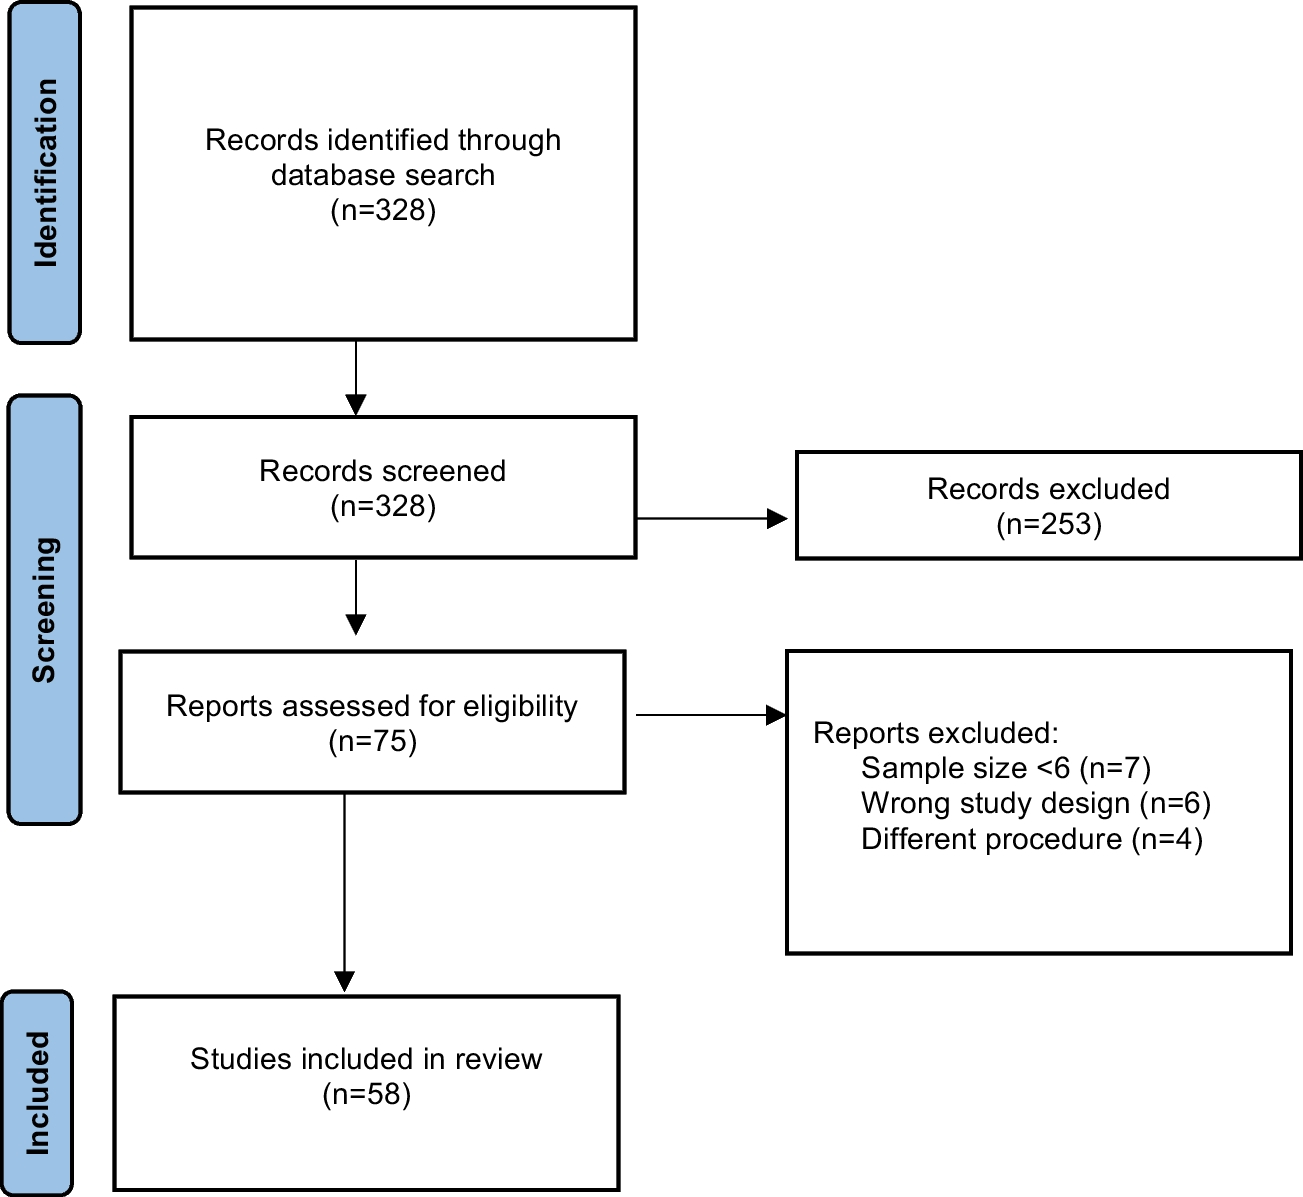 Surgical Management of Headache Disorders - A Systematic Review of the Literature